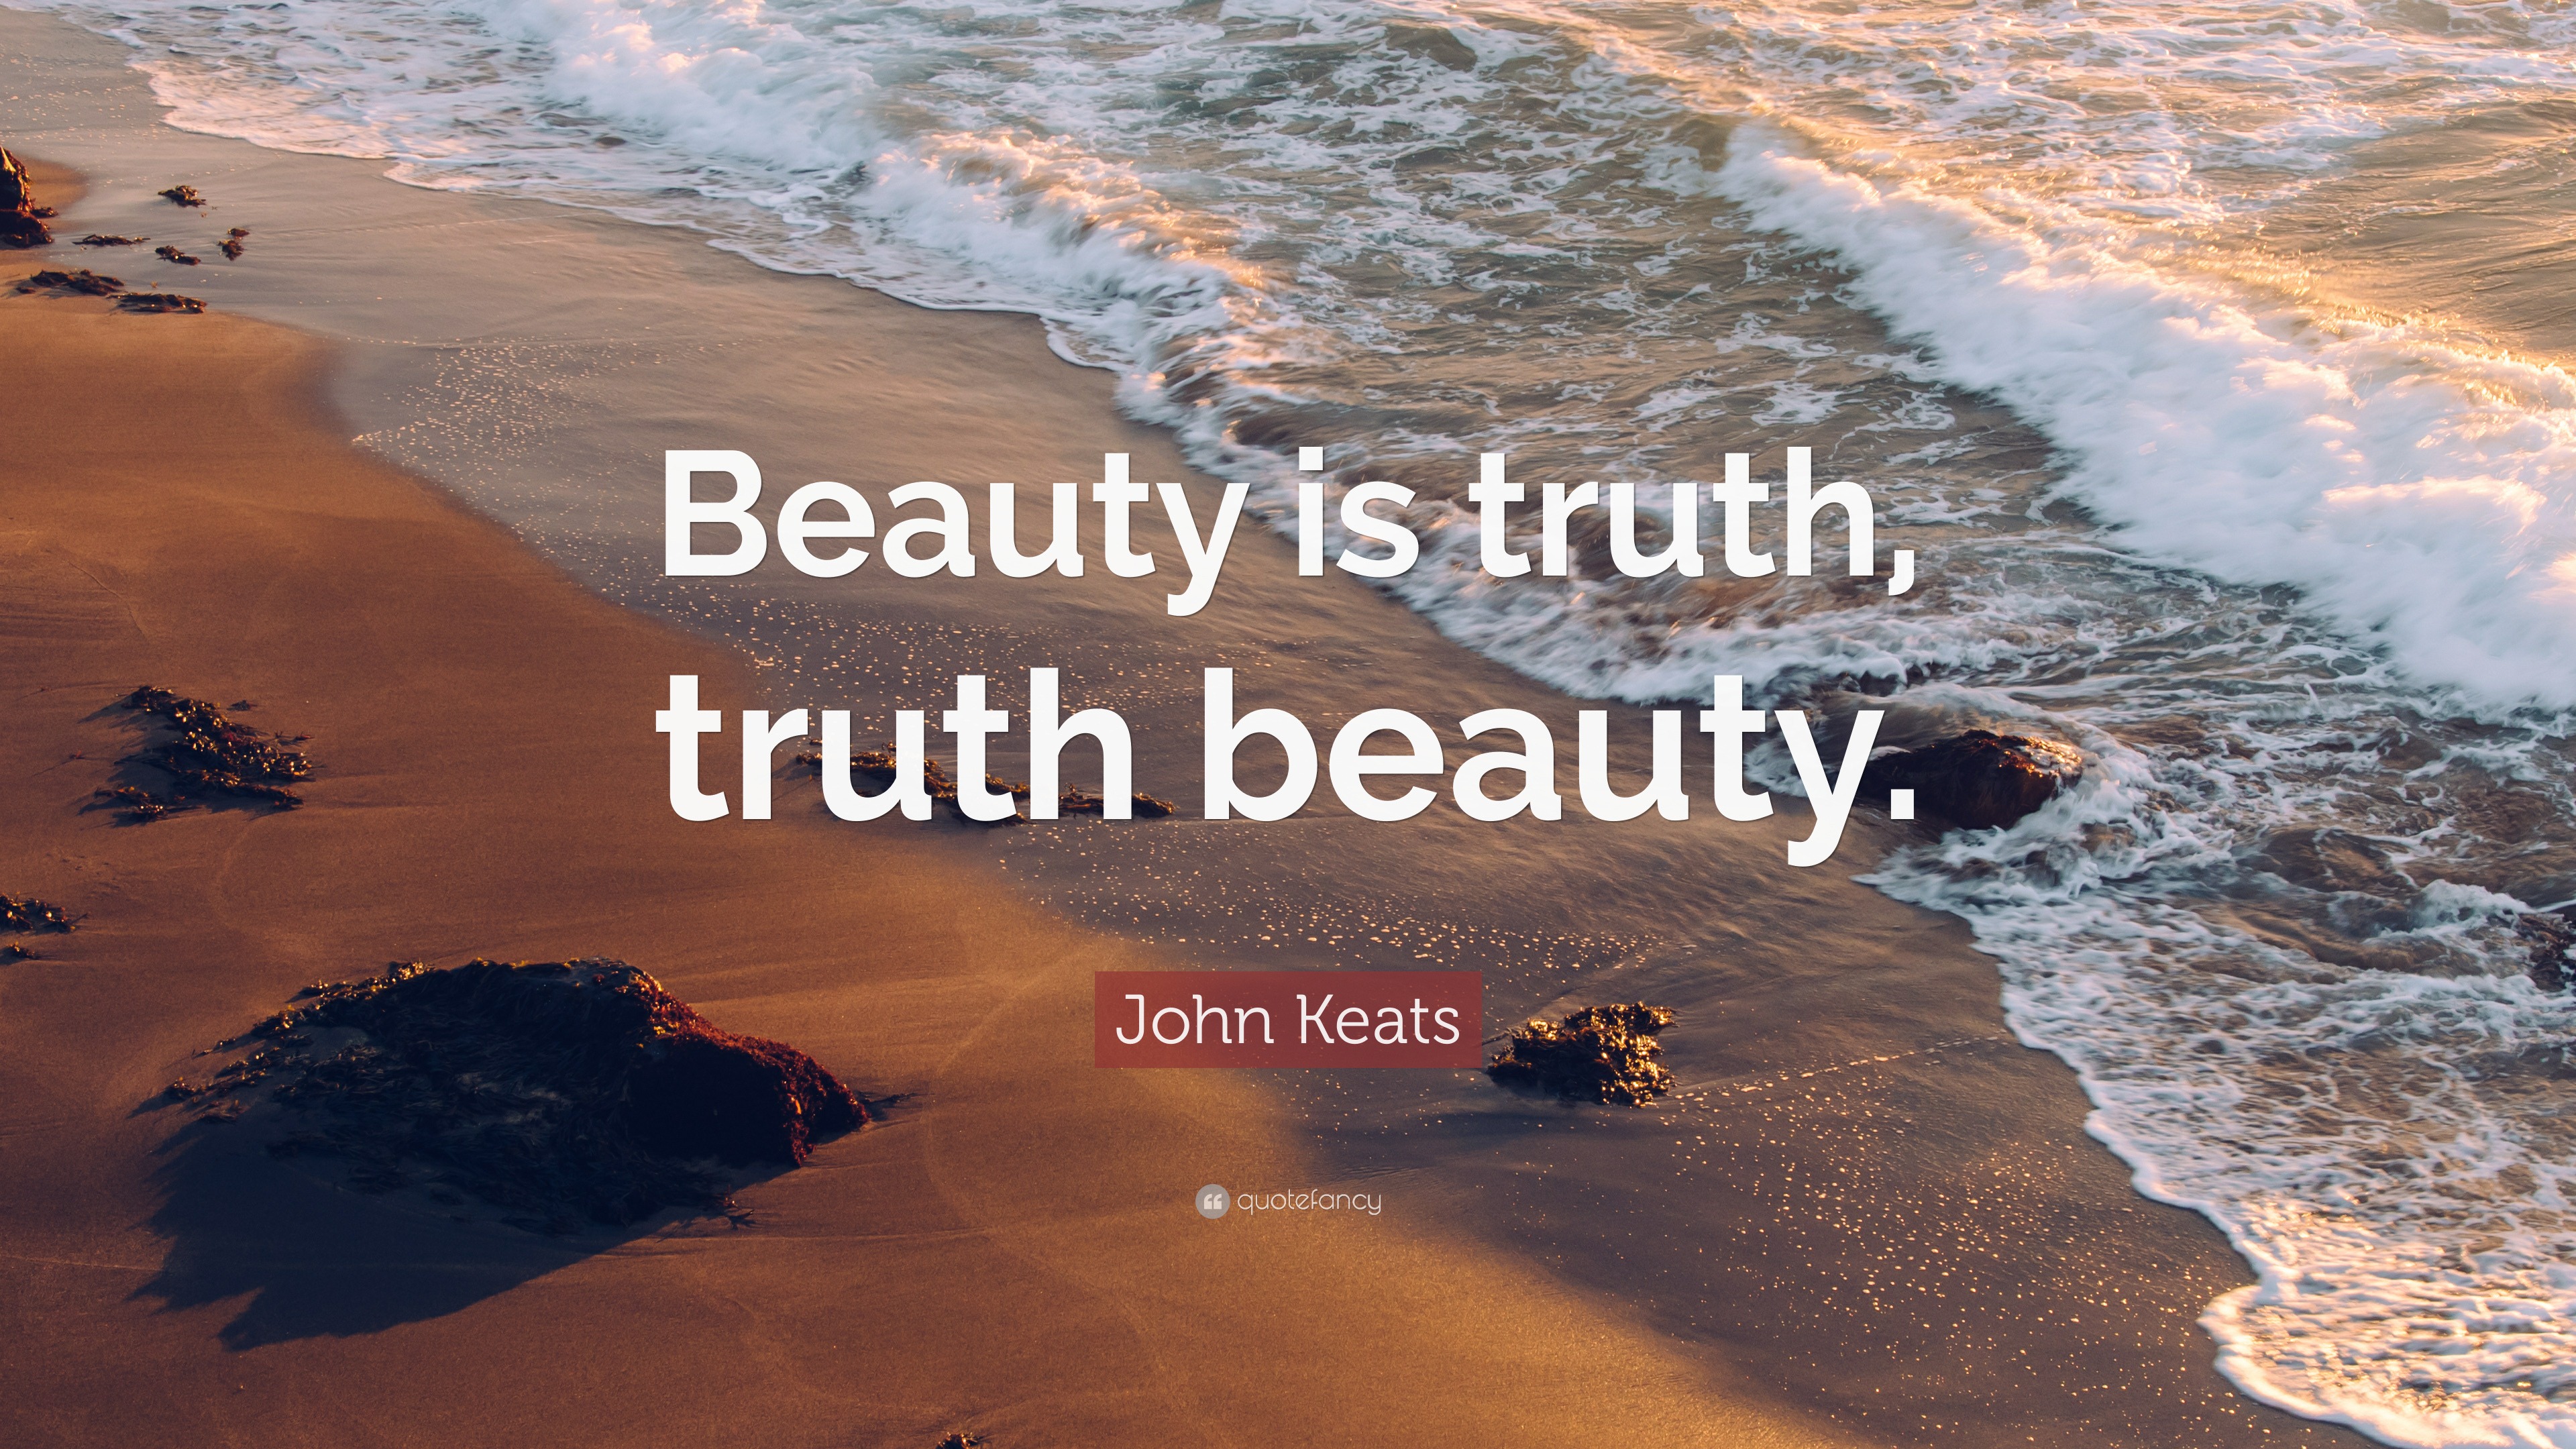 essay on beauty is truth truth is beauty